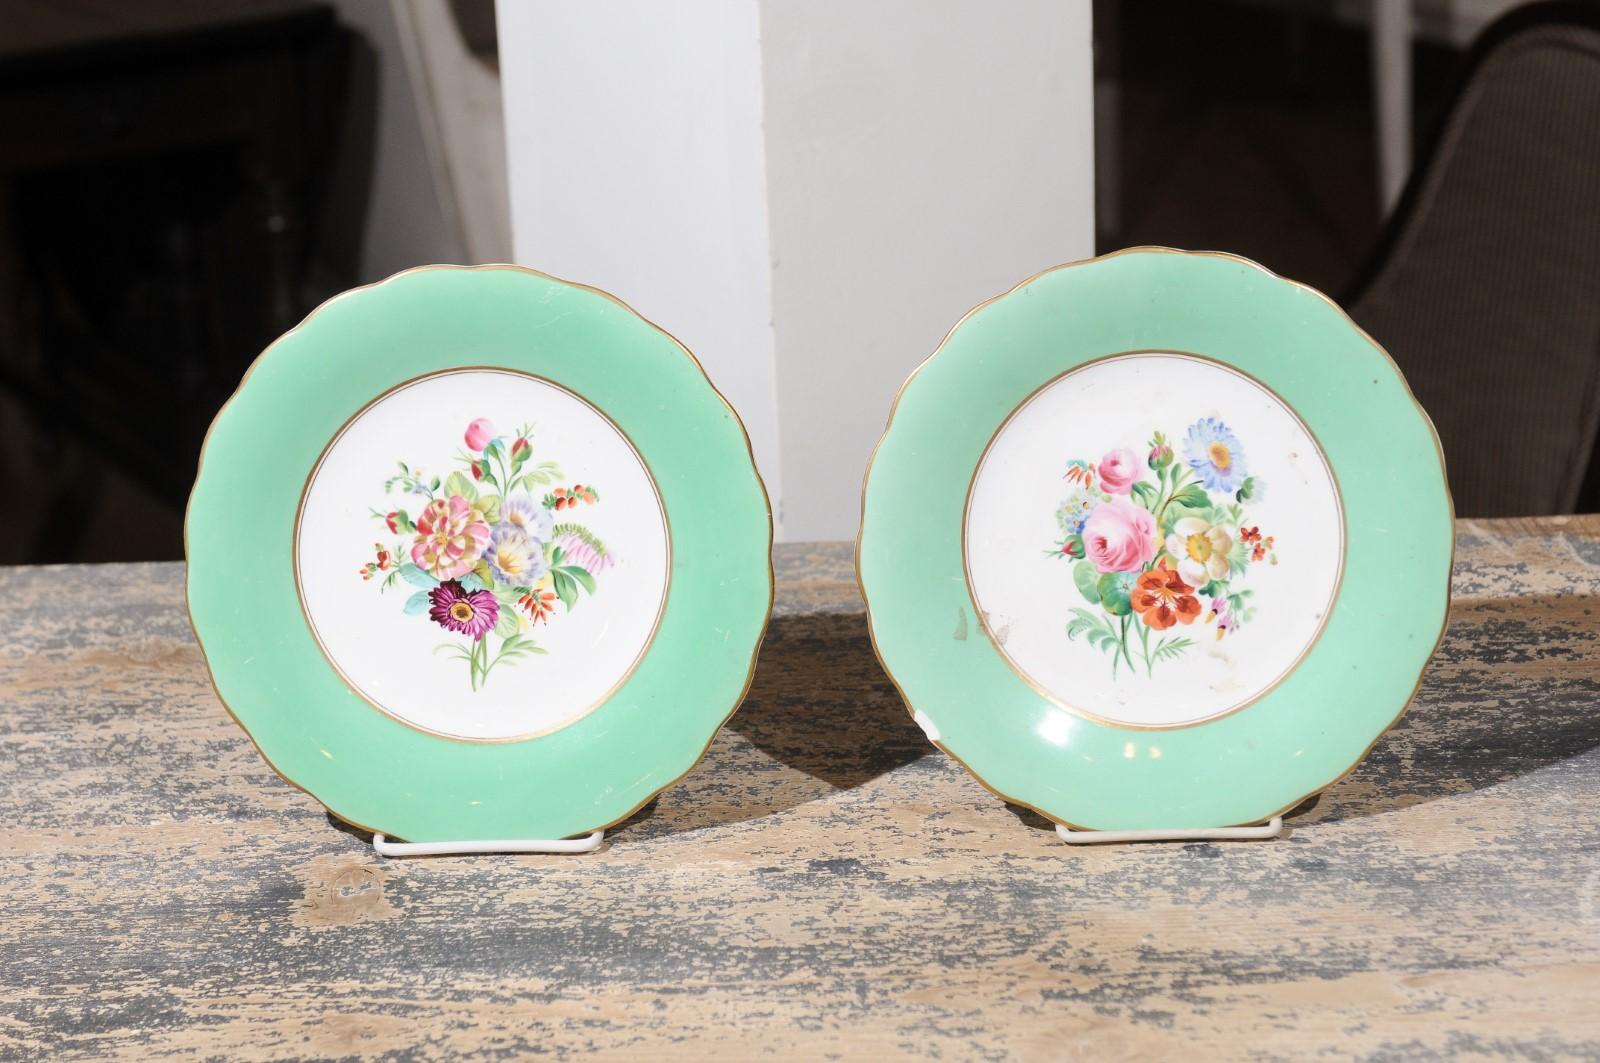 A pair of English Victorian floral plates from the late 19th century, with green and gold trim. Born in England during the 19th century, each of this pair of plates features a stunning bouquet of colorful flowers including pink roses and daisies.